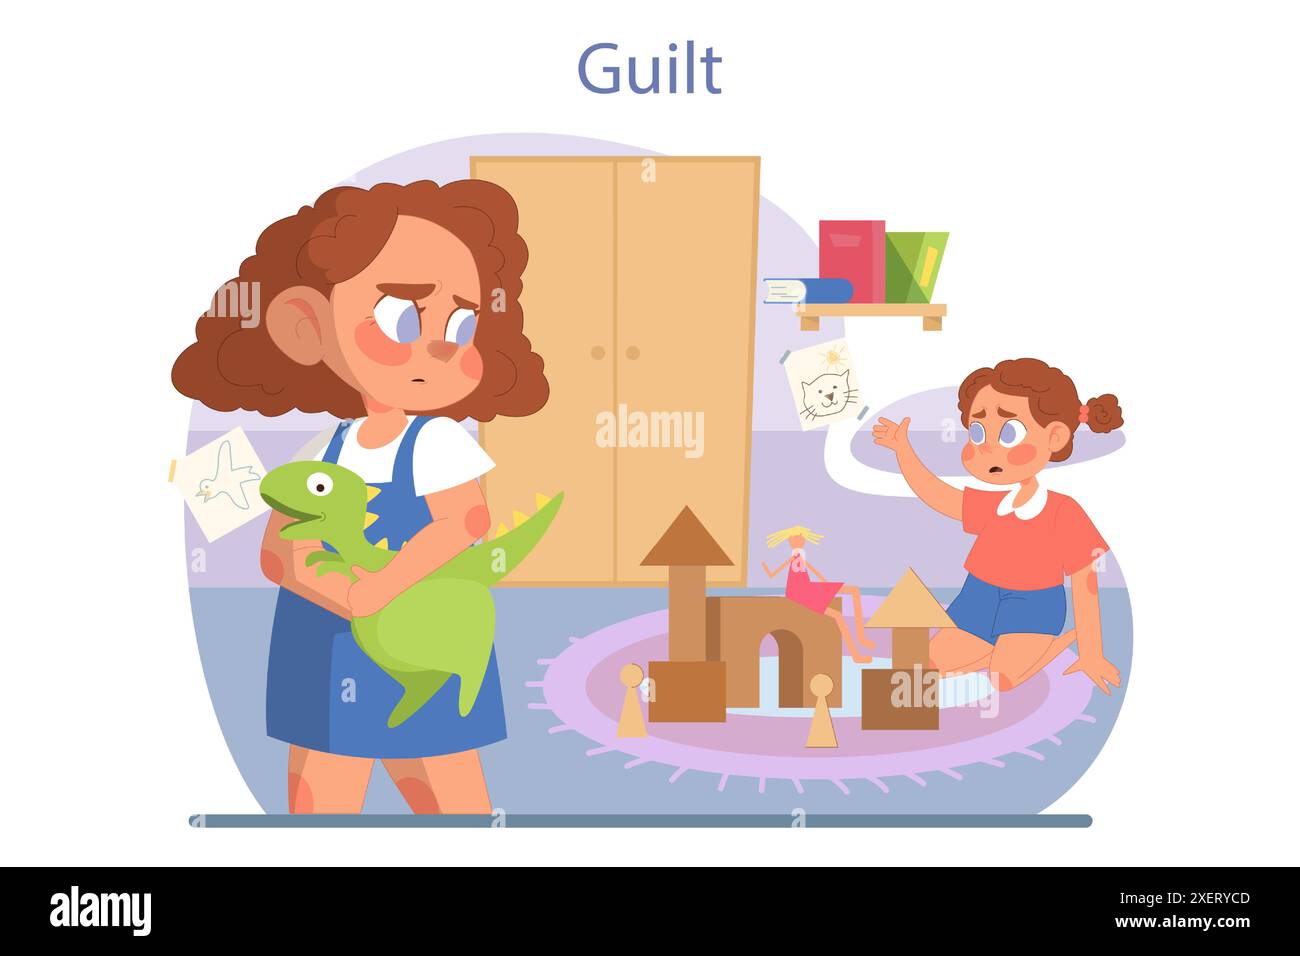 Children emotions. Embarrassed little girl feels guilty, taking a toy from another kid. Sisters playing together in the room. Child' emotional intelligence development. Flat vector illustration Stock Vector